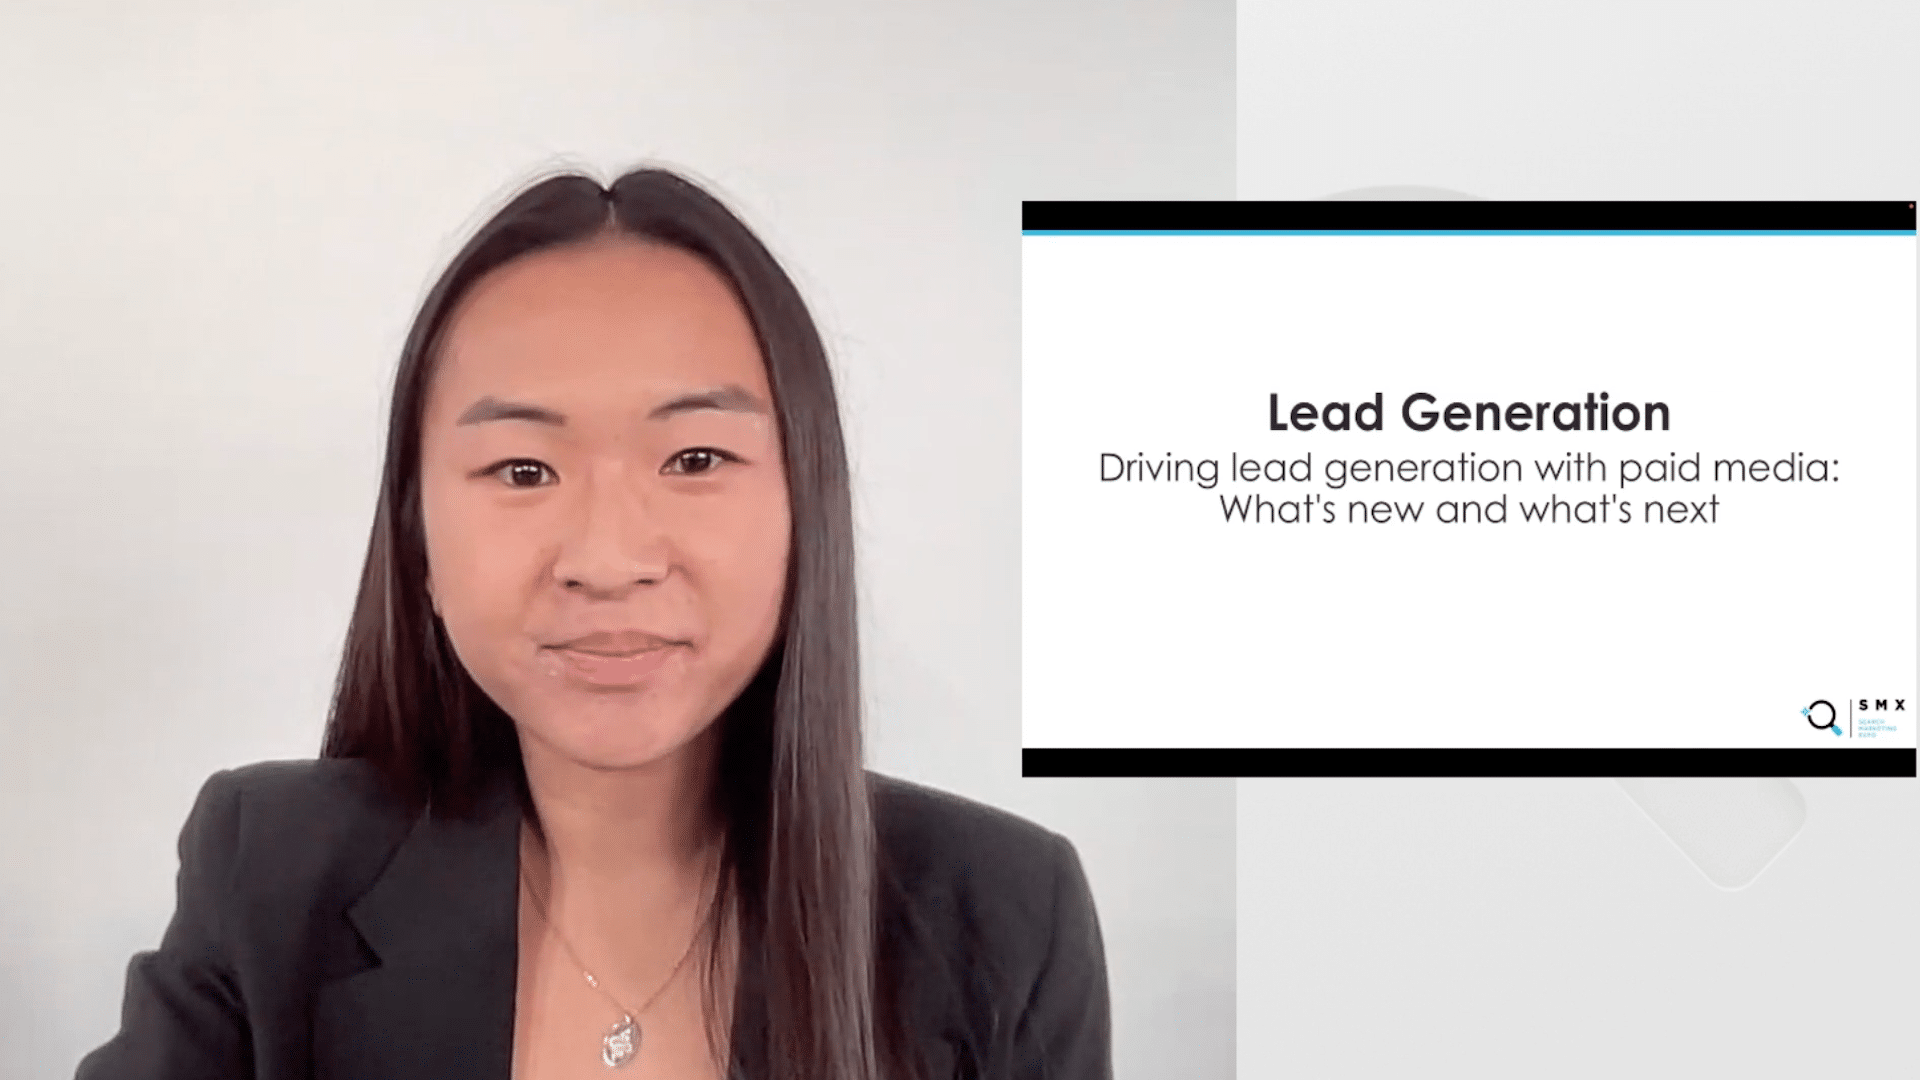 Driving lead generation with paid media: What’s new and what’s next